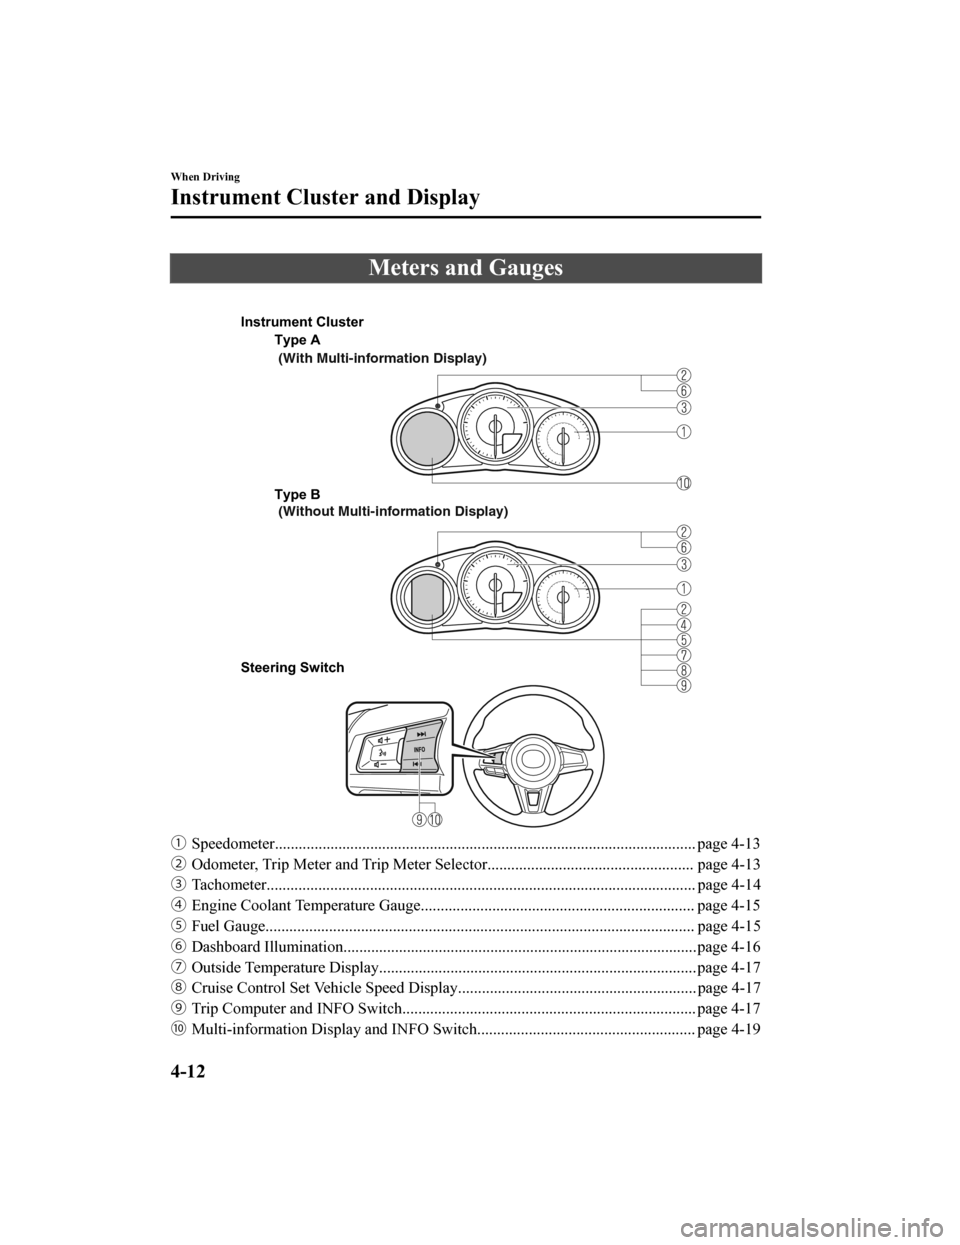 MAZDA MODEL MX-5 2020  Owners Manual (in English) Meters and Gauges
 
Type A
Type B 
Steering Switch  (With Multi-information Display)
 (Without Multi-information Display)
Instrument Cluster
ƒ
Speedometer............................................